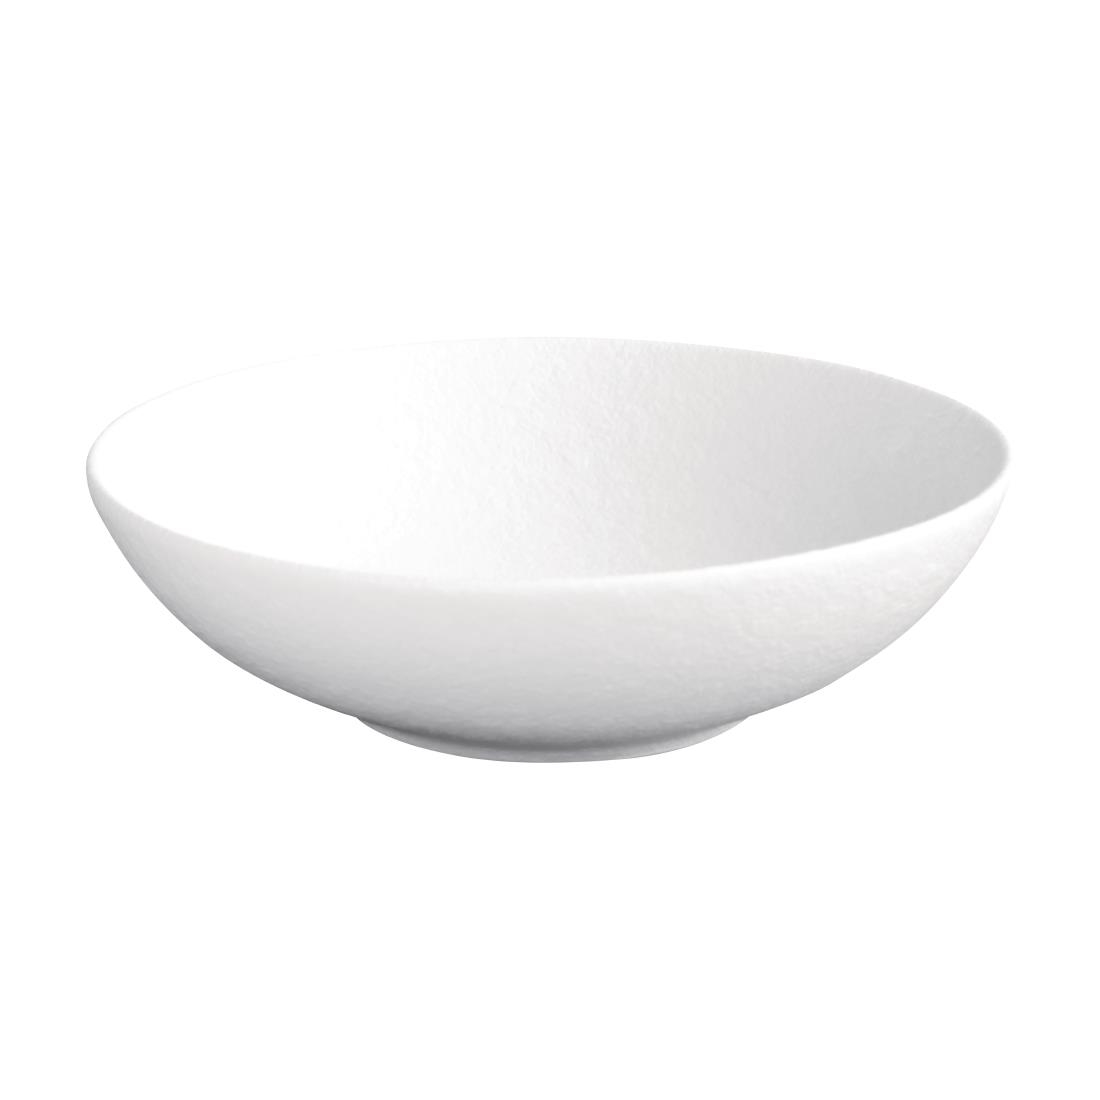 Olympia Salina Coupe Bowls 200mm (Pack of 4)